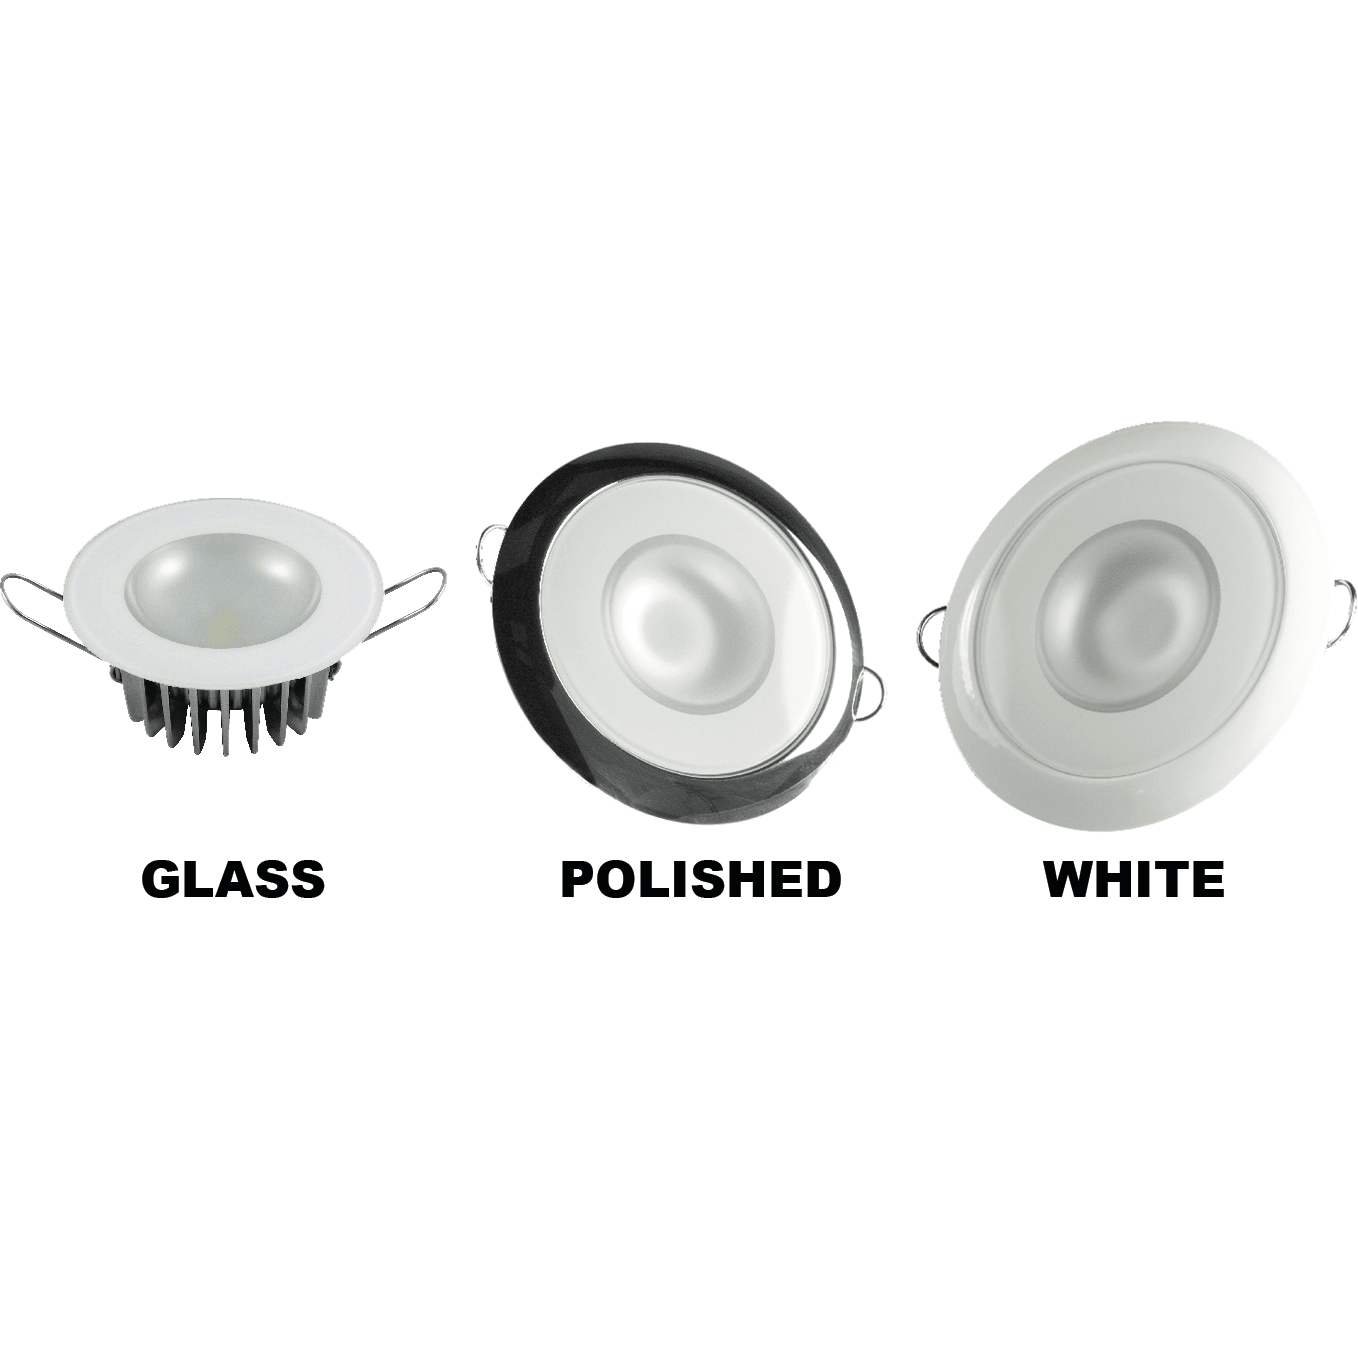 2-1/2" Mirage Recessed Mount Polished Stainless Steel LED Down Light